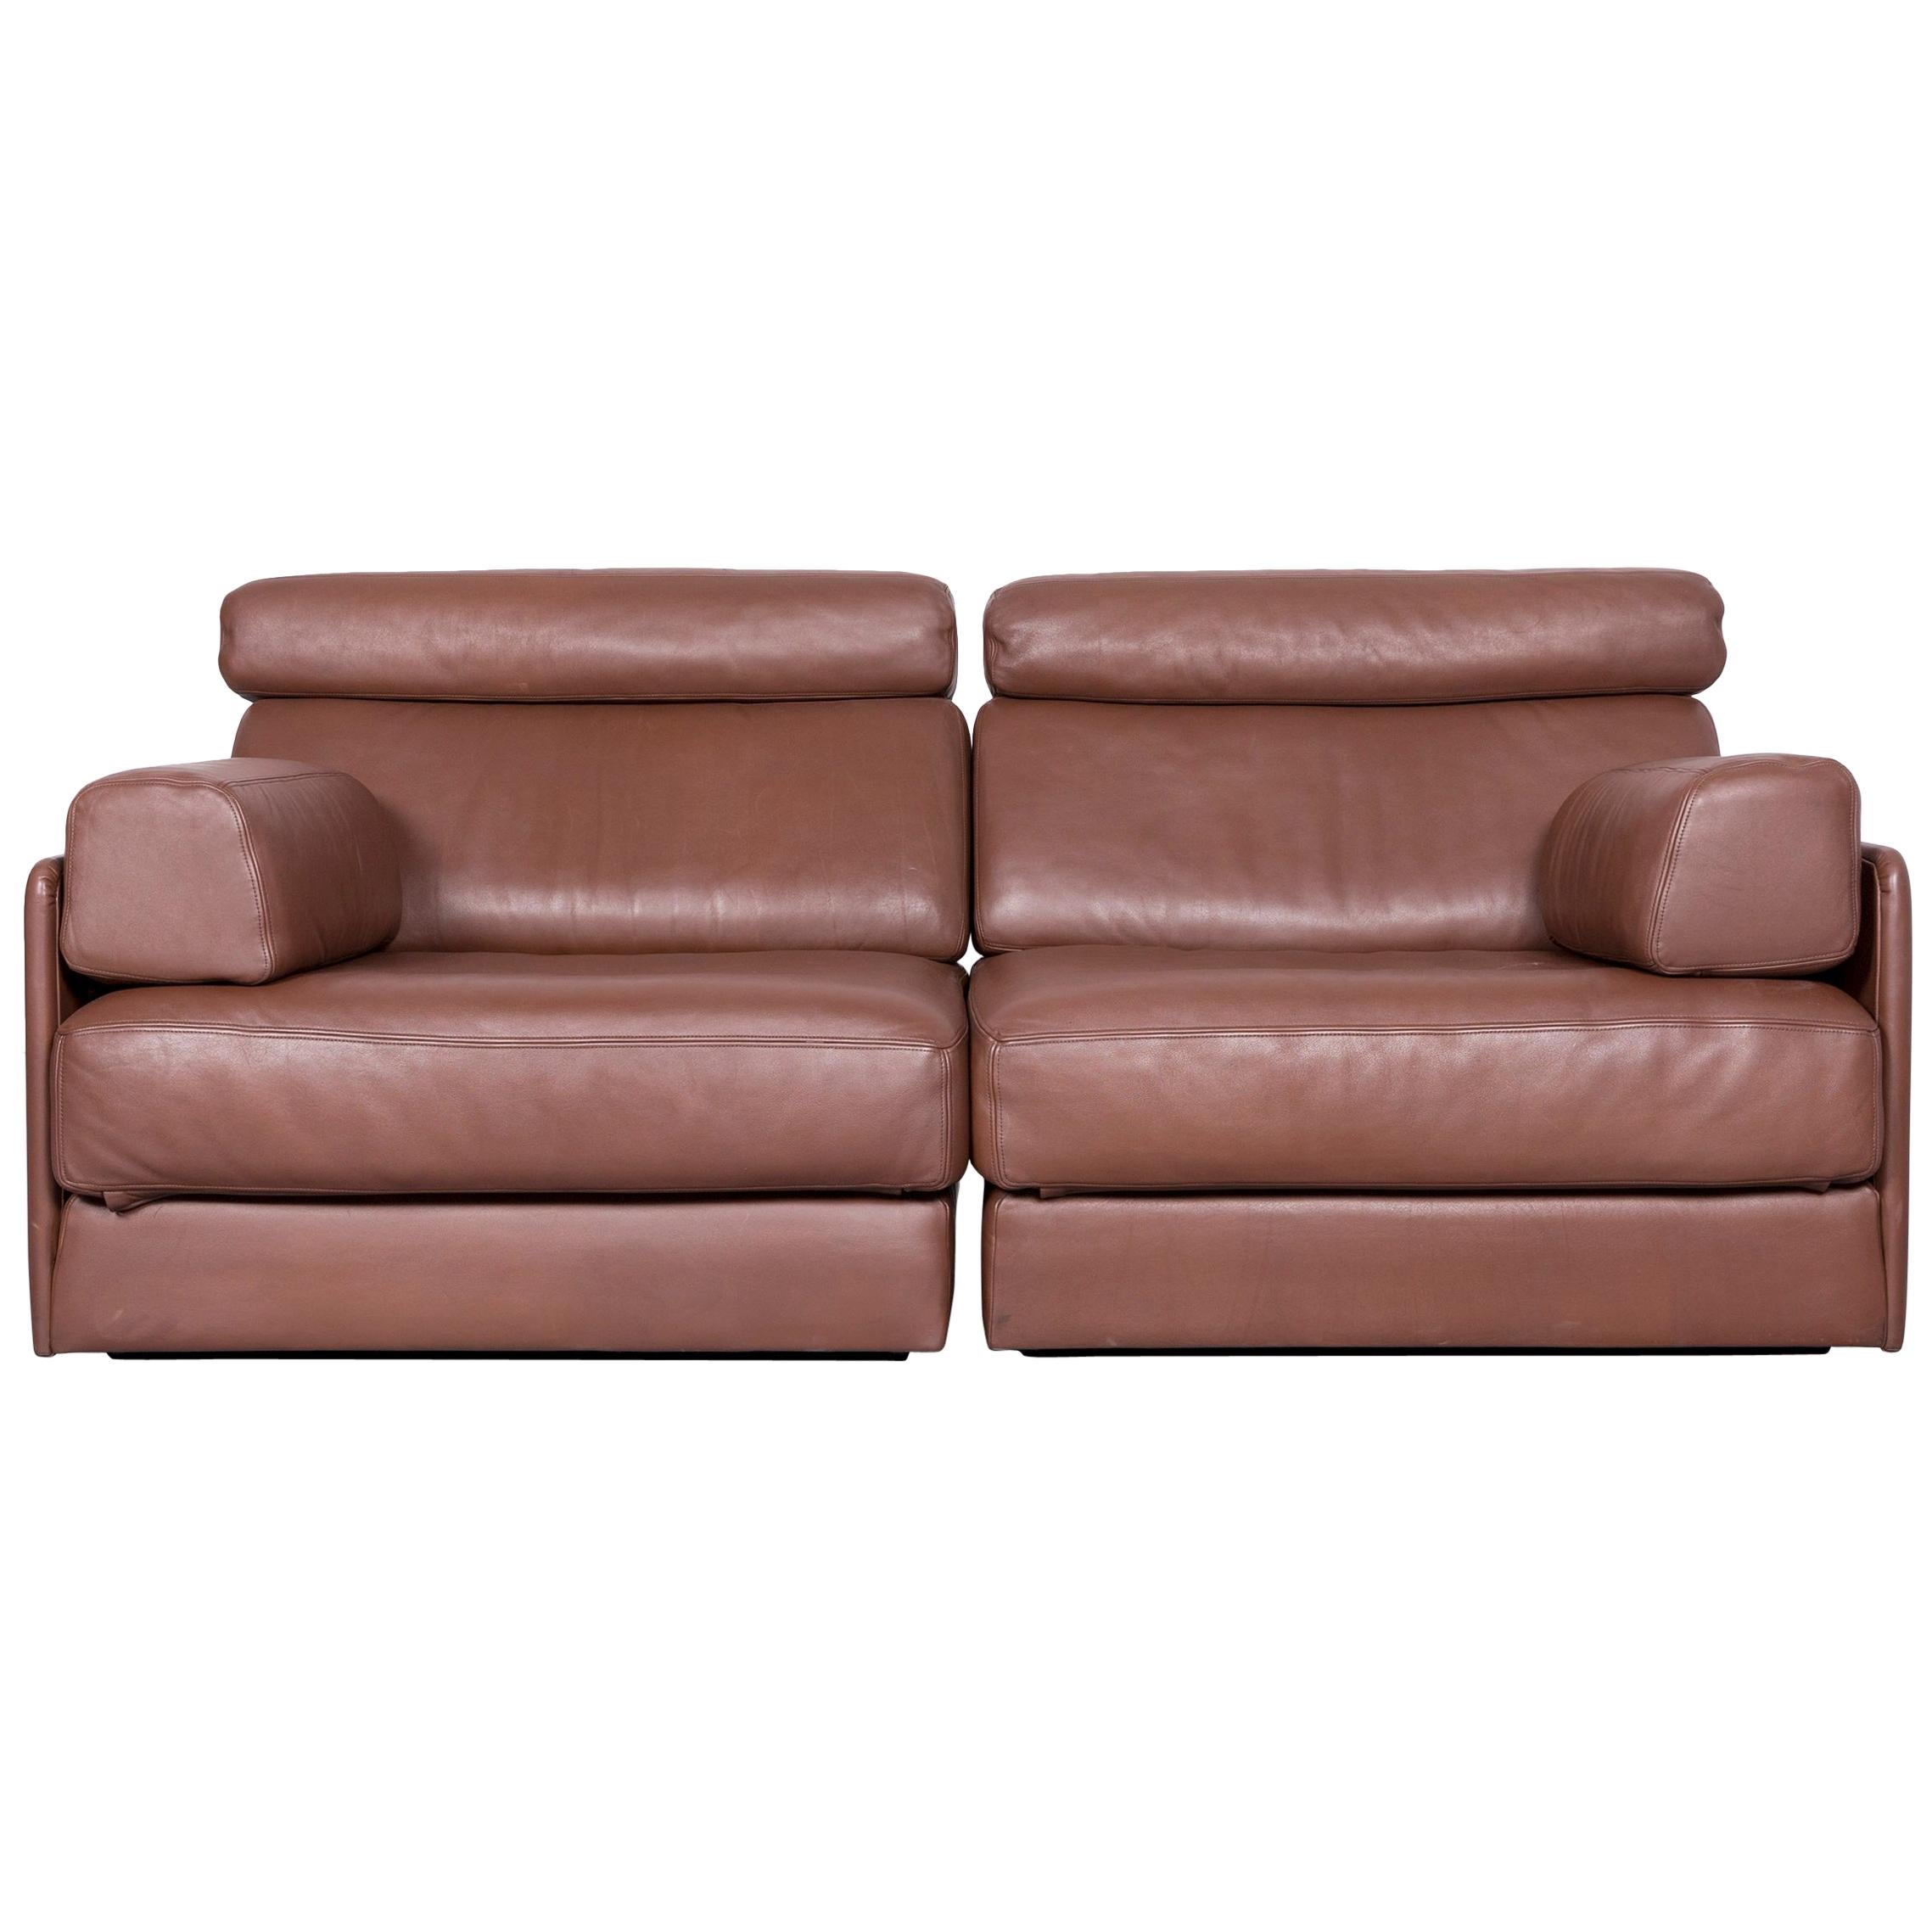 De Sede Ds 77 Designer Leather Sofa Brown Two-Seat Couch For Sale